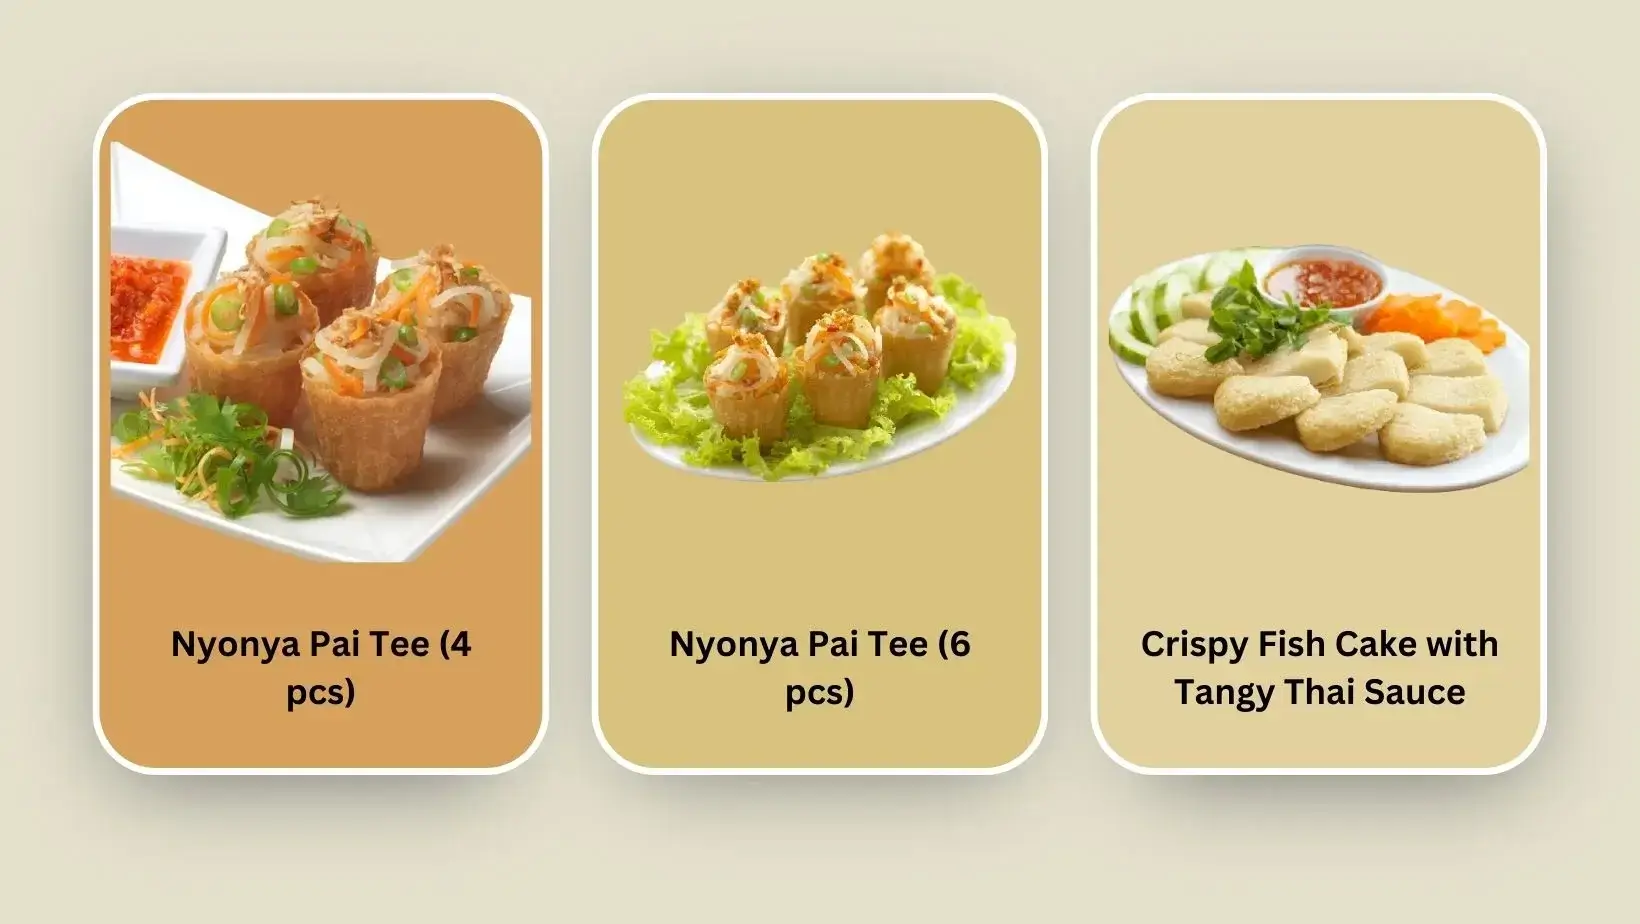 Chicken Combi Menu items at the chicken Rice shop Malaysia